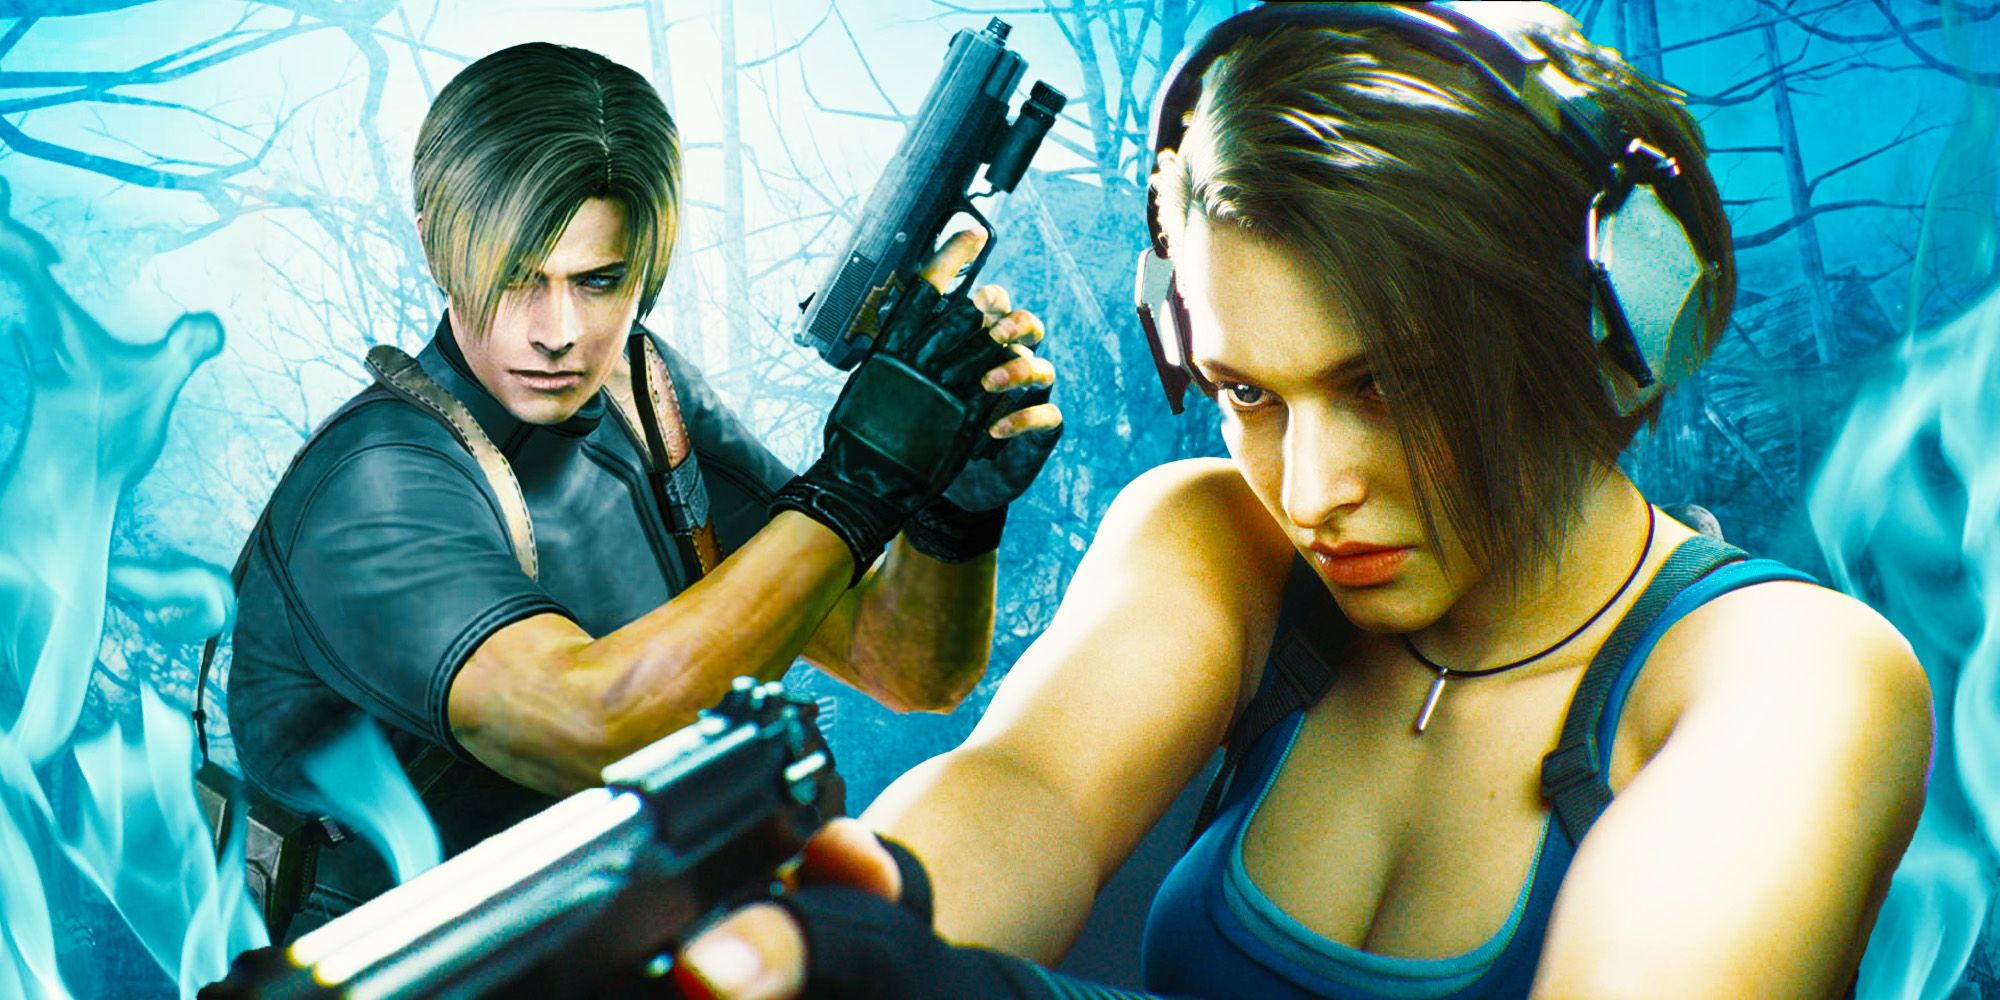 Jill and Leon from the Resident Evil series.